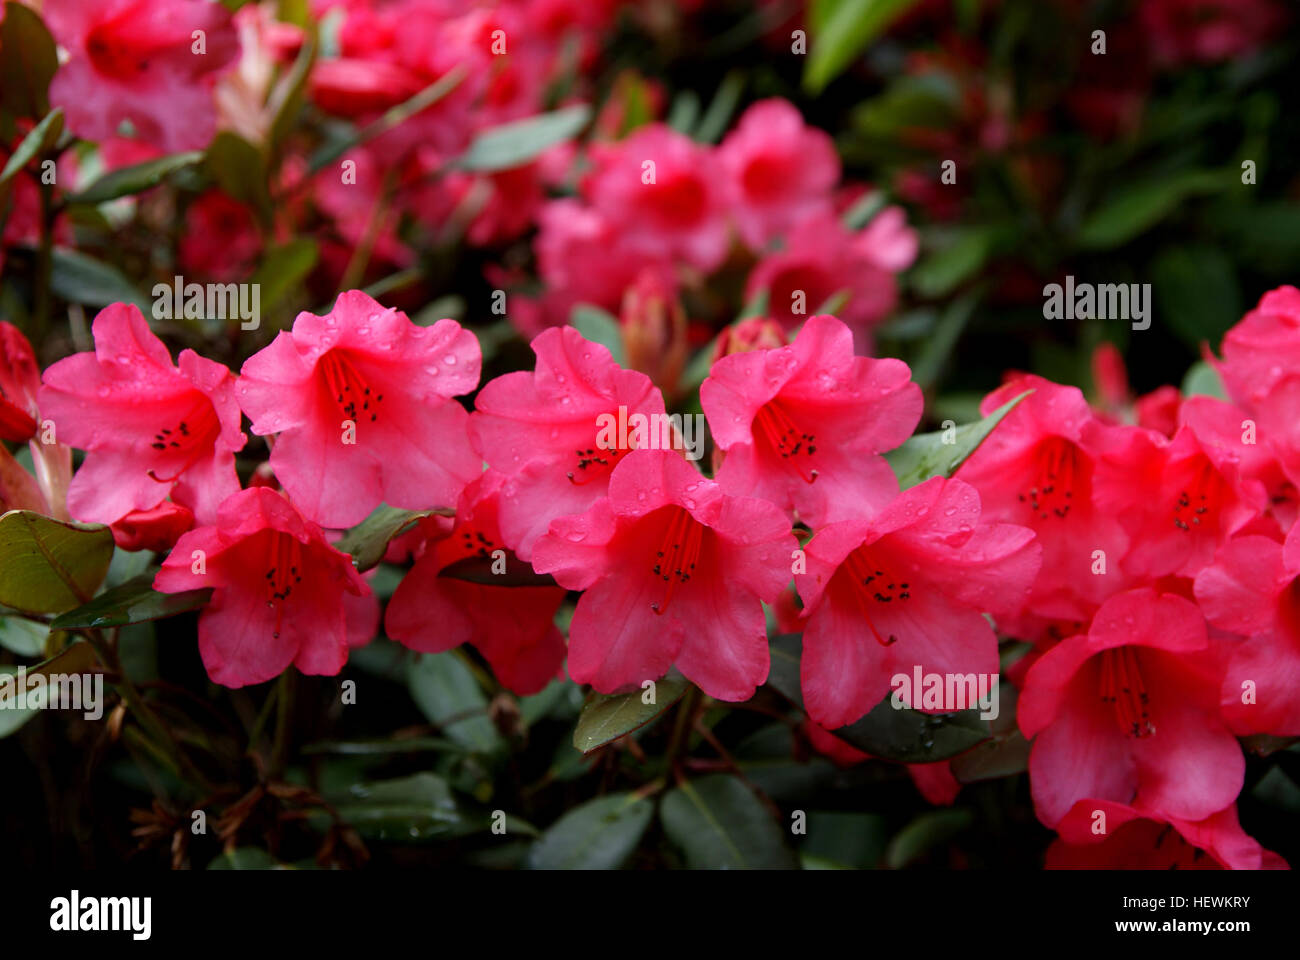 ication (,),,,Blooms,Rhododendron Noyo Chief,Rhododrendron,florals,flowers,gardening Stock Photo